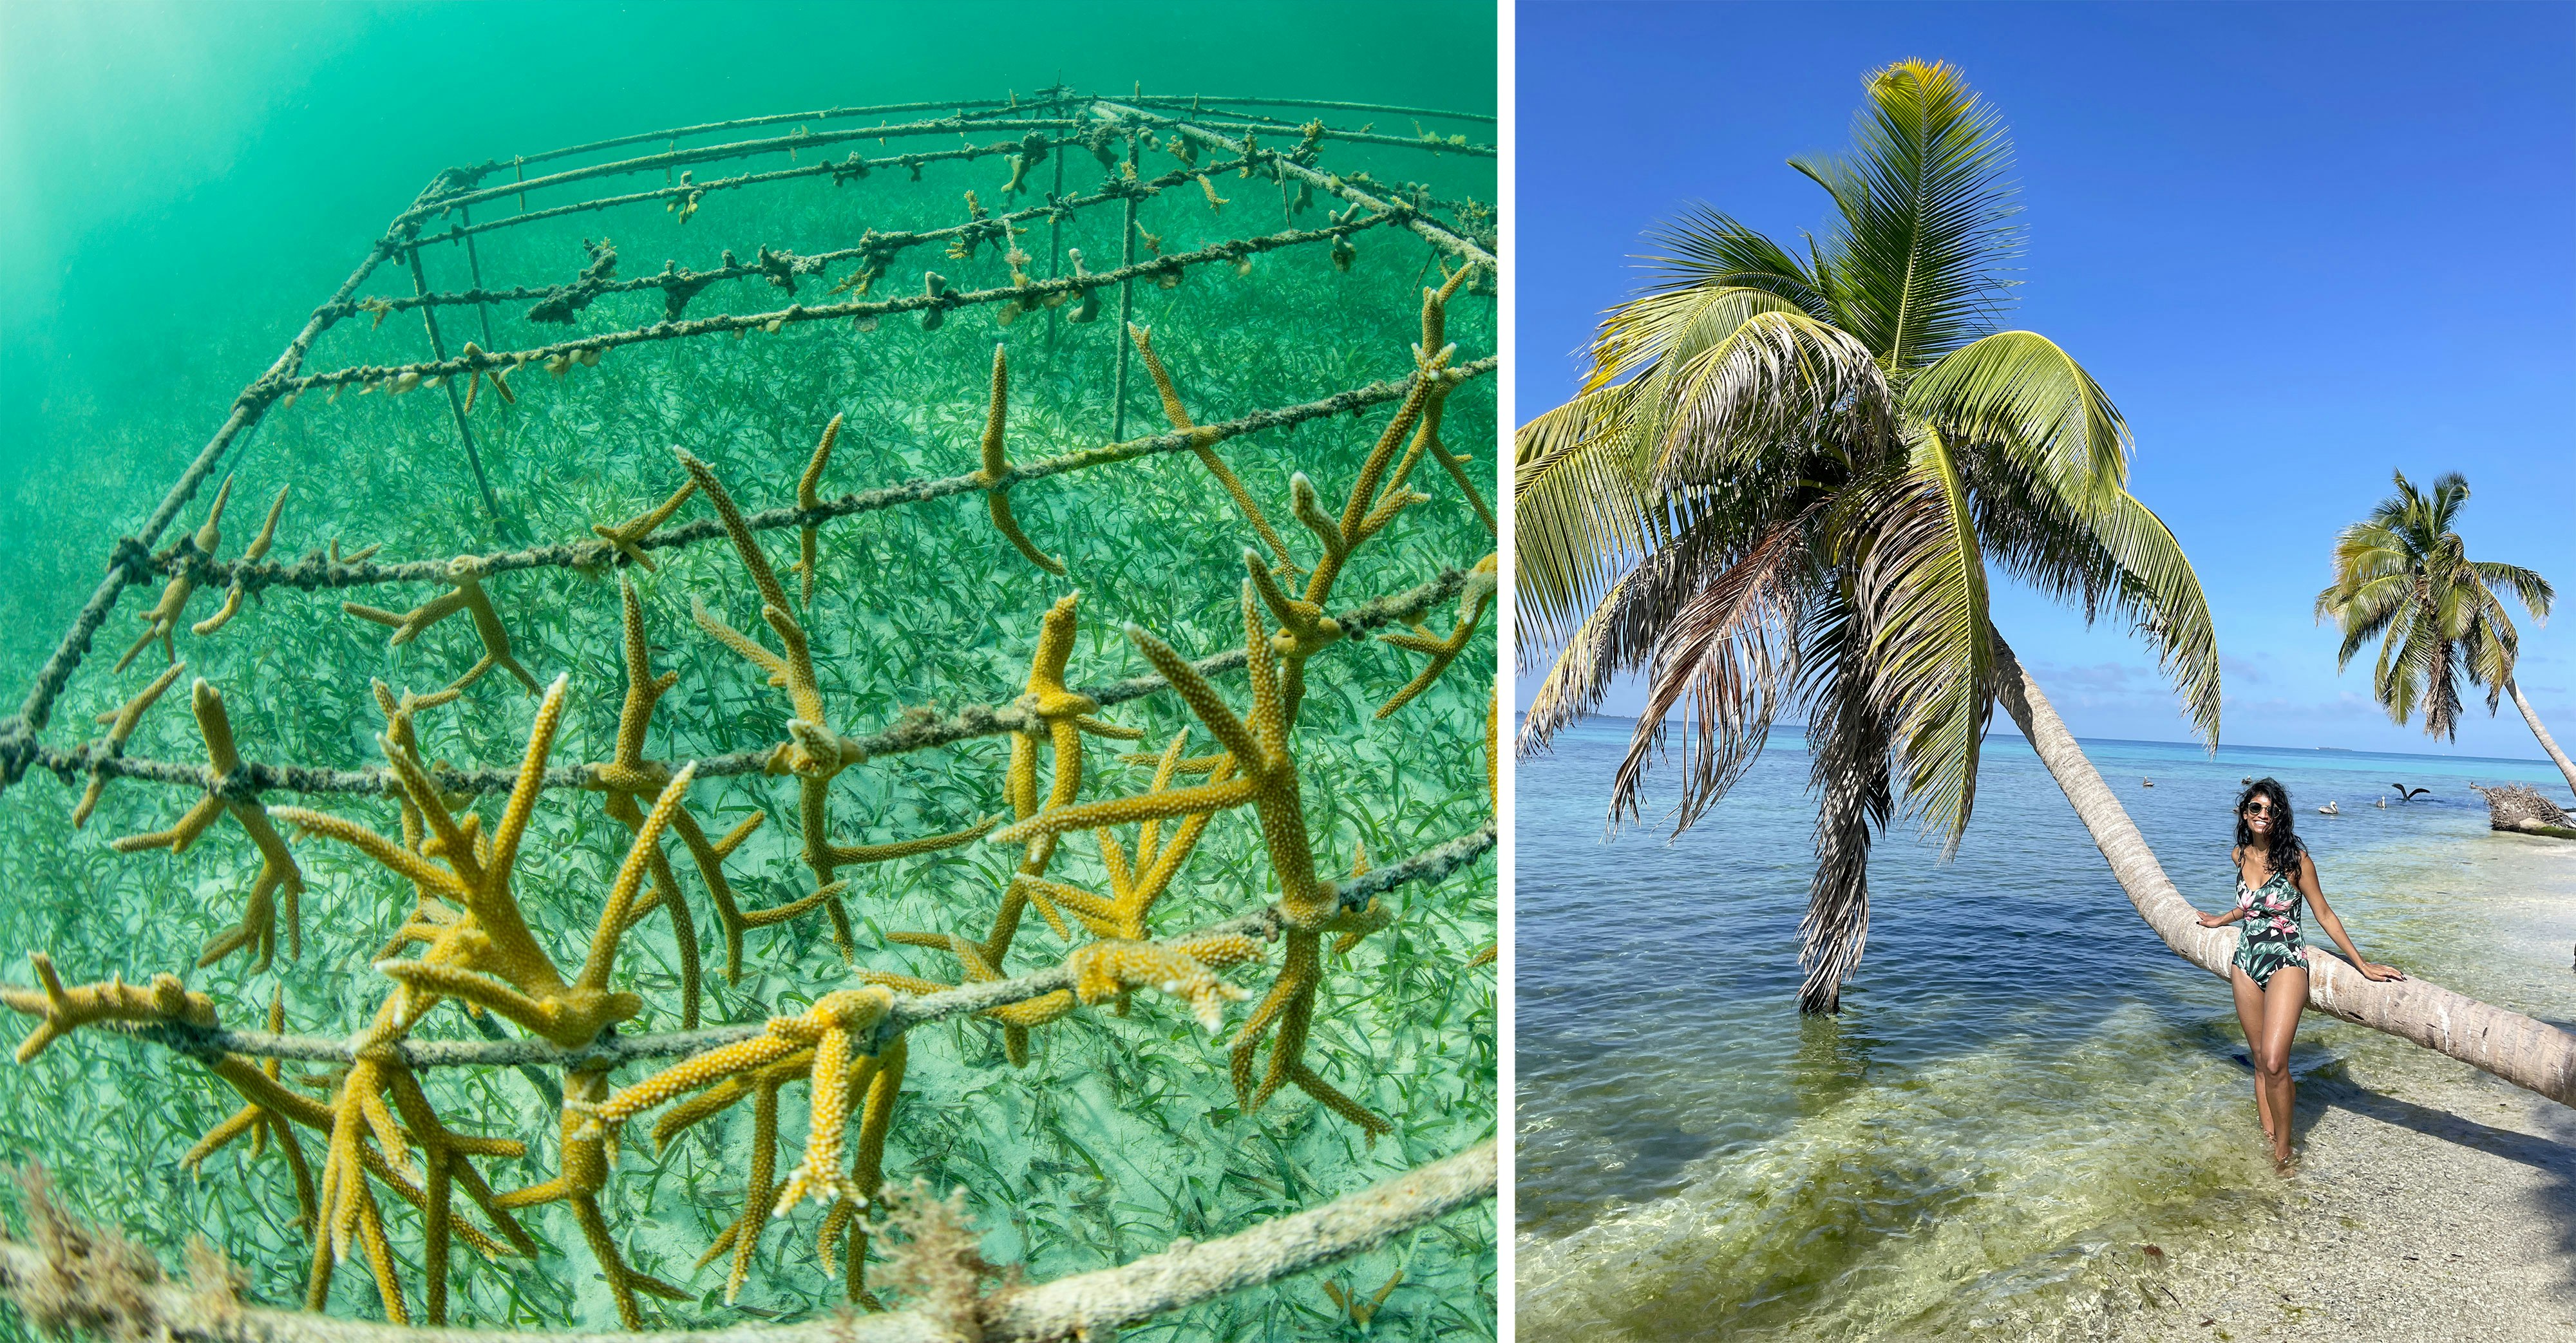 Left: coral regrowth project with strands of coral on an artificial frame underwater; Right: woman in a bikini on a beach